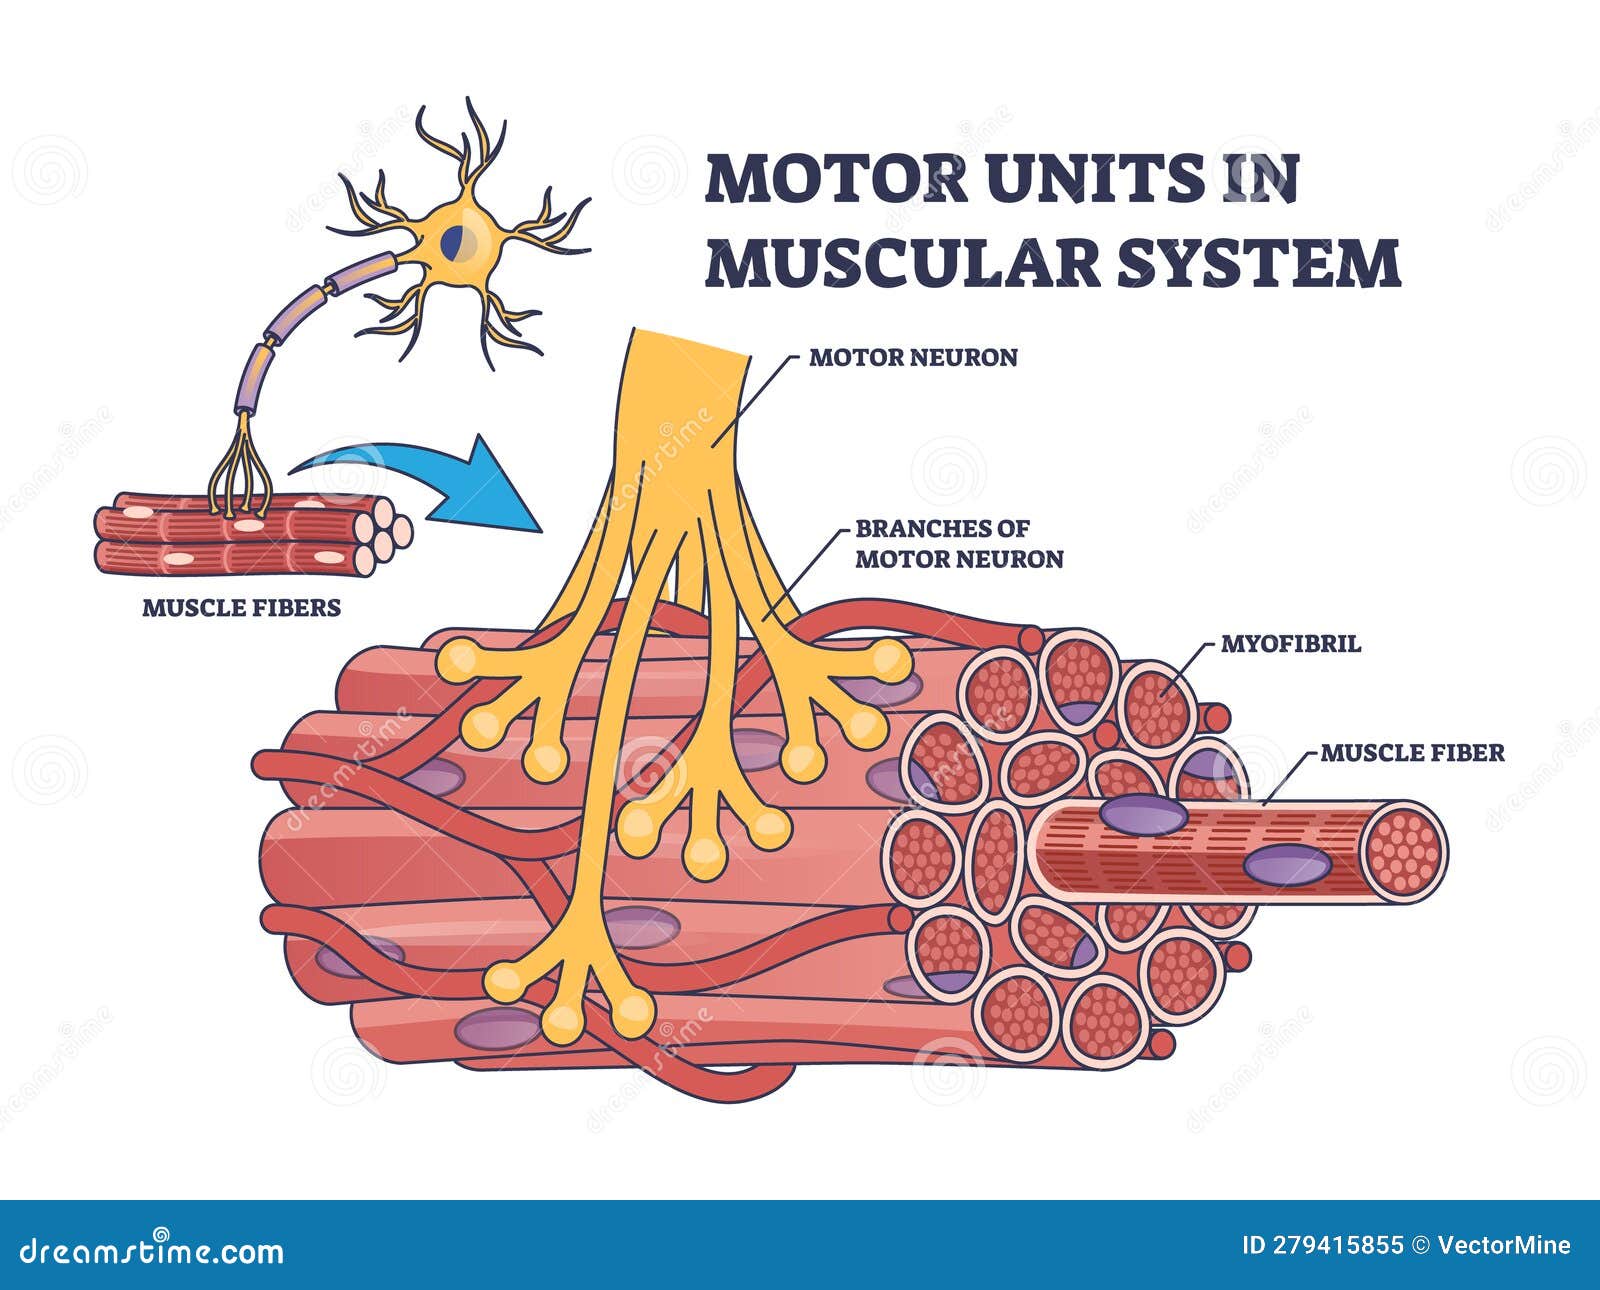 motor units in muscular system with fibers neuron anatomy outline diagram